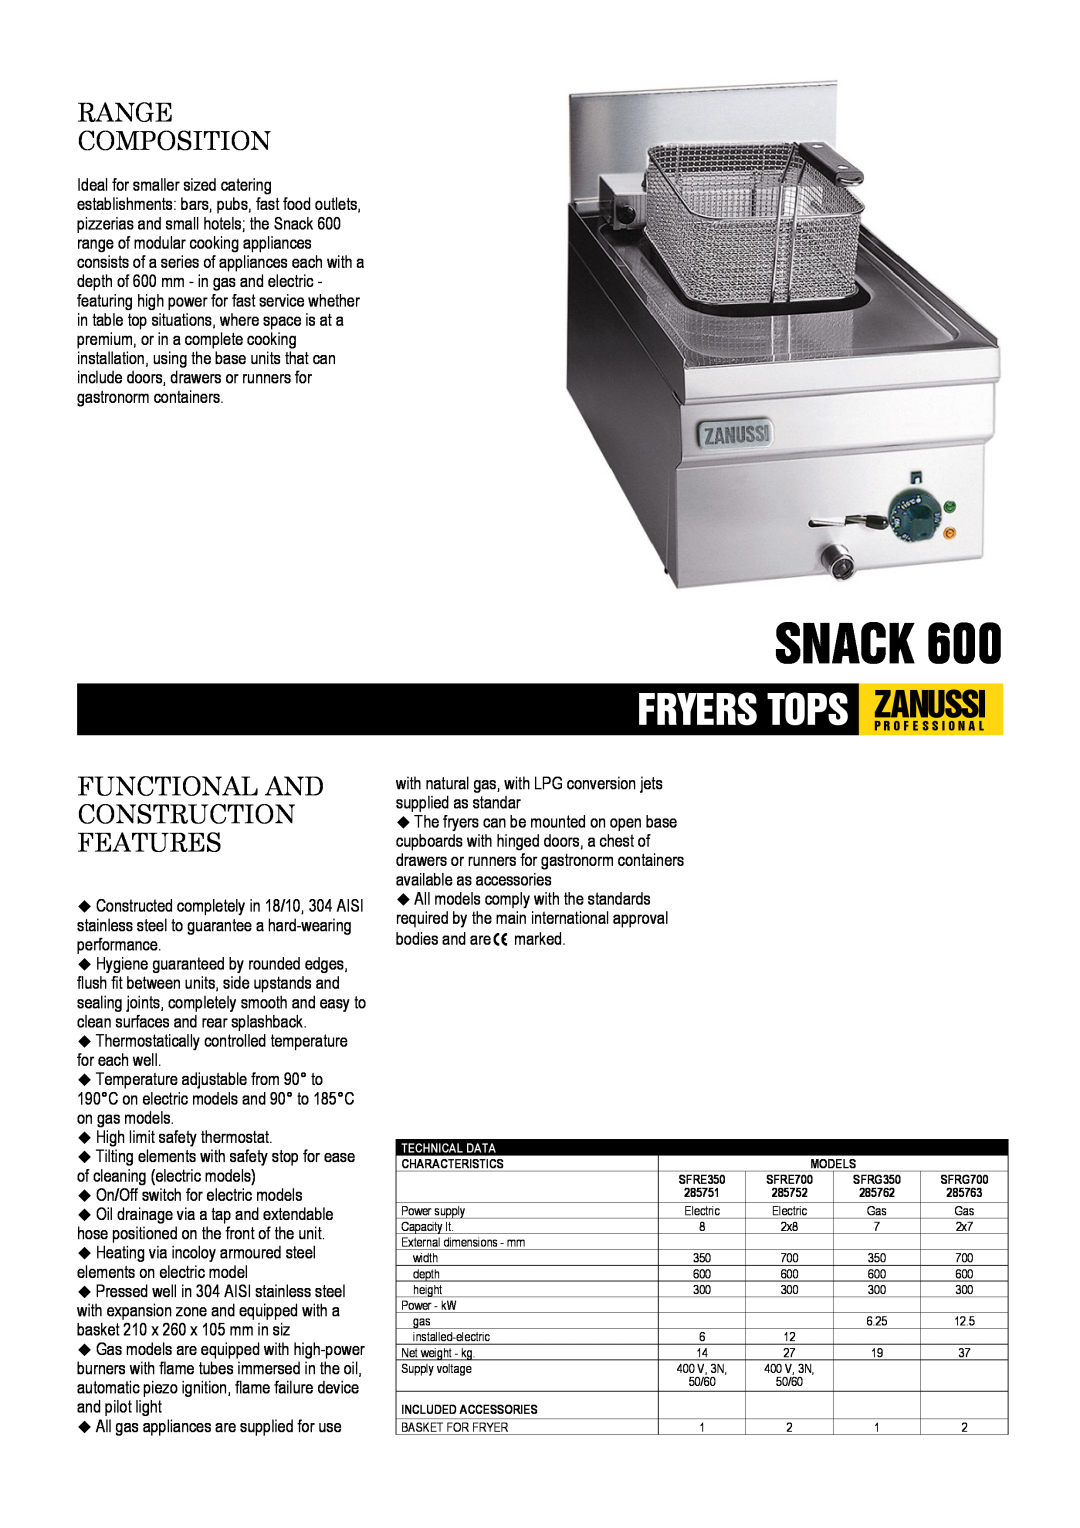 Zanussi SFRE350, SFRG350, SFRE700, SFRG700, 285752 dimensions Snack, Range Composition, Functional And Construction Features 